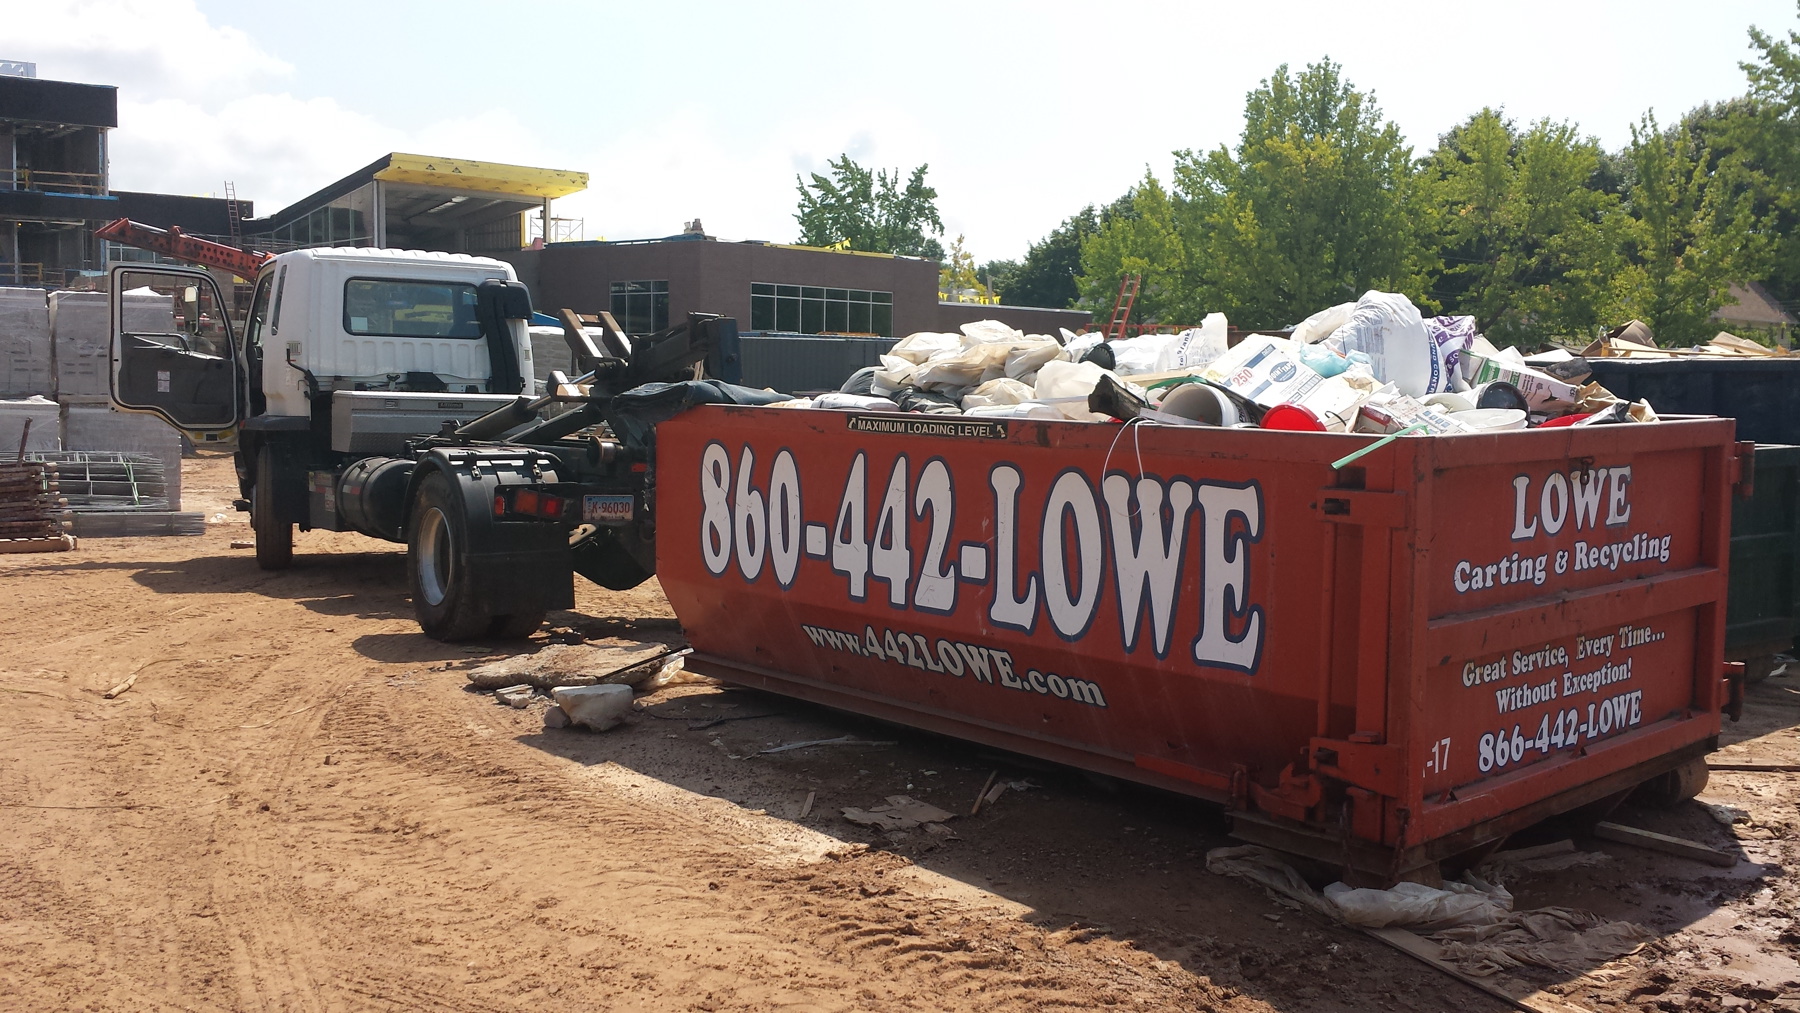 Pricing And Sizes Lowe Carting And Recycling